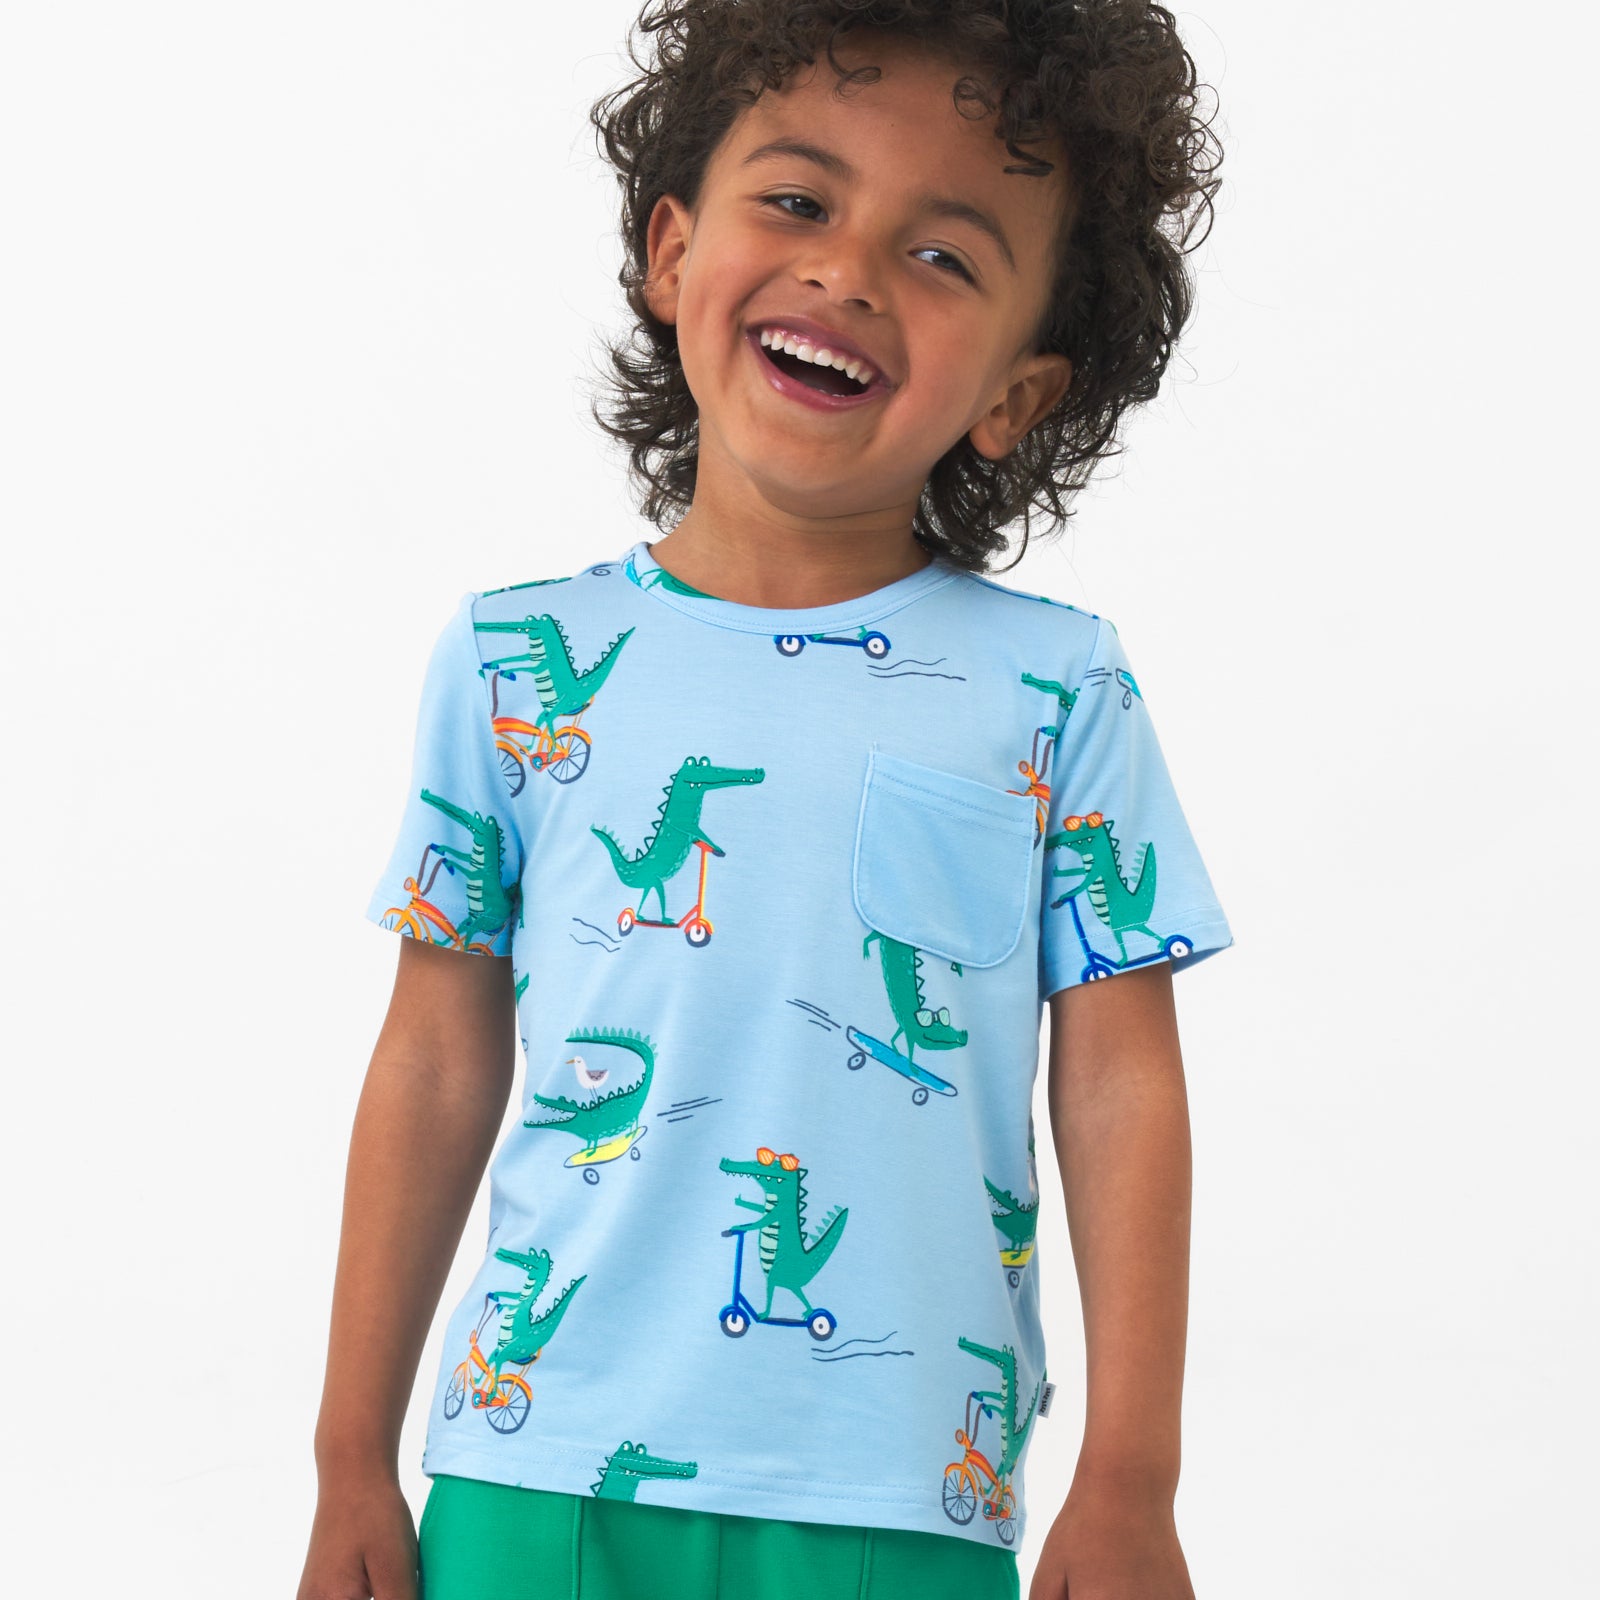 Close up image of a child wearing a Later Gator pocket tee and coordinating shorts